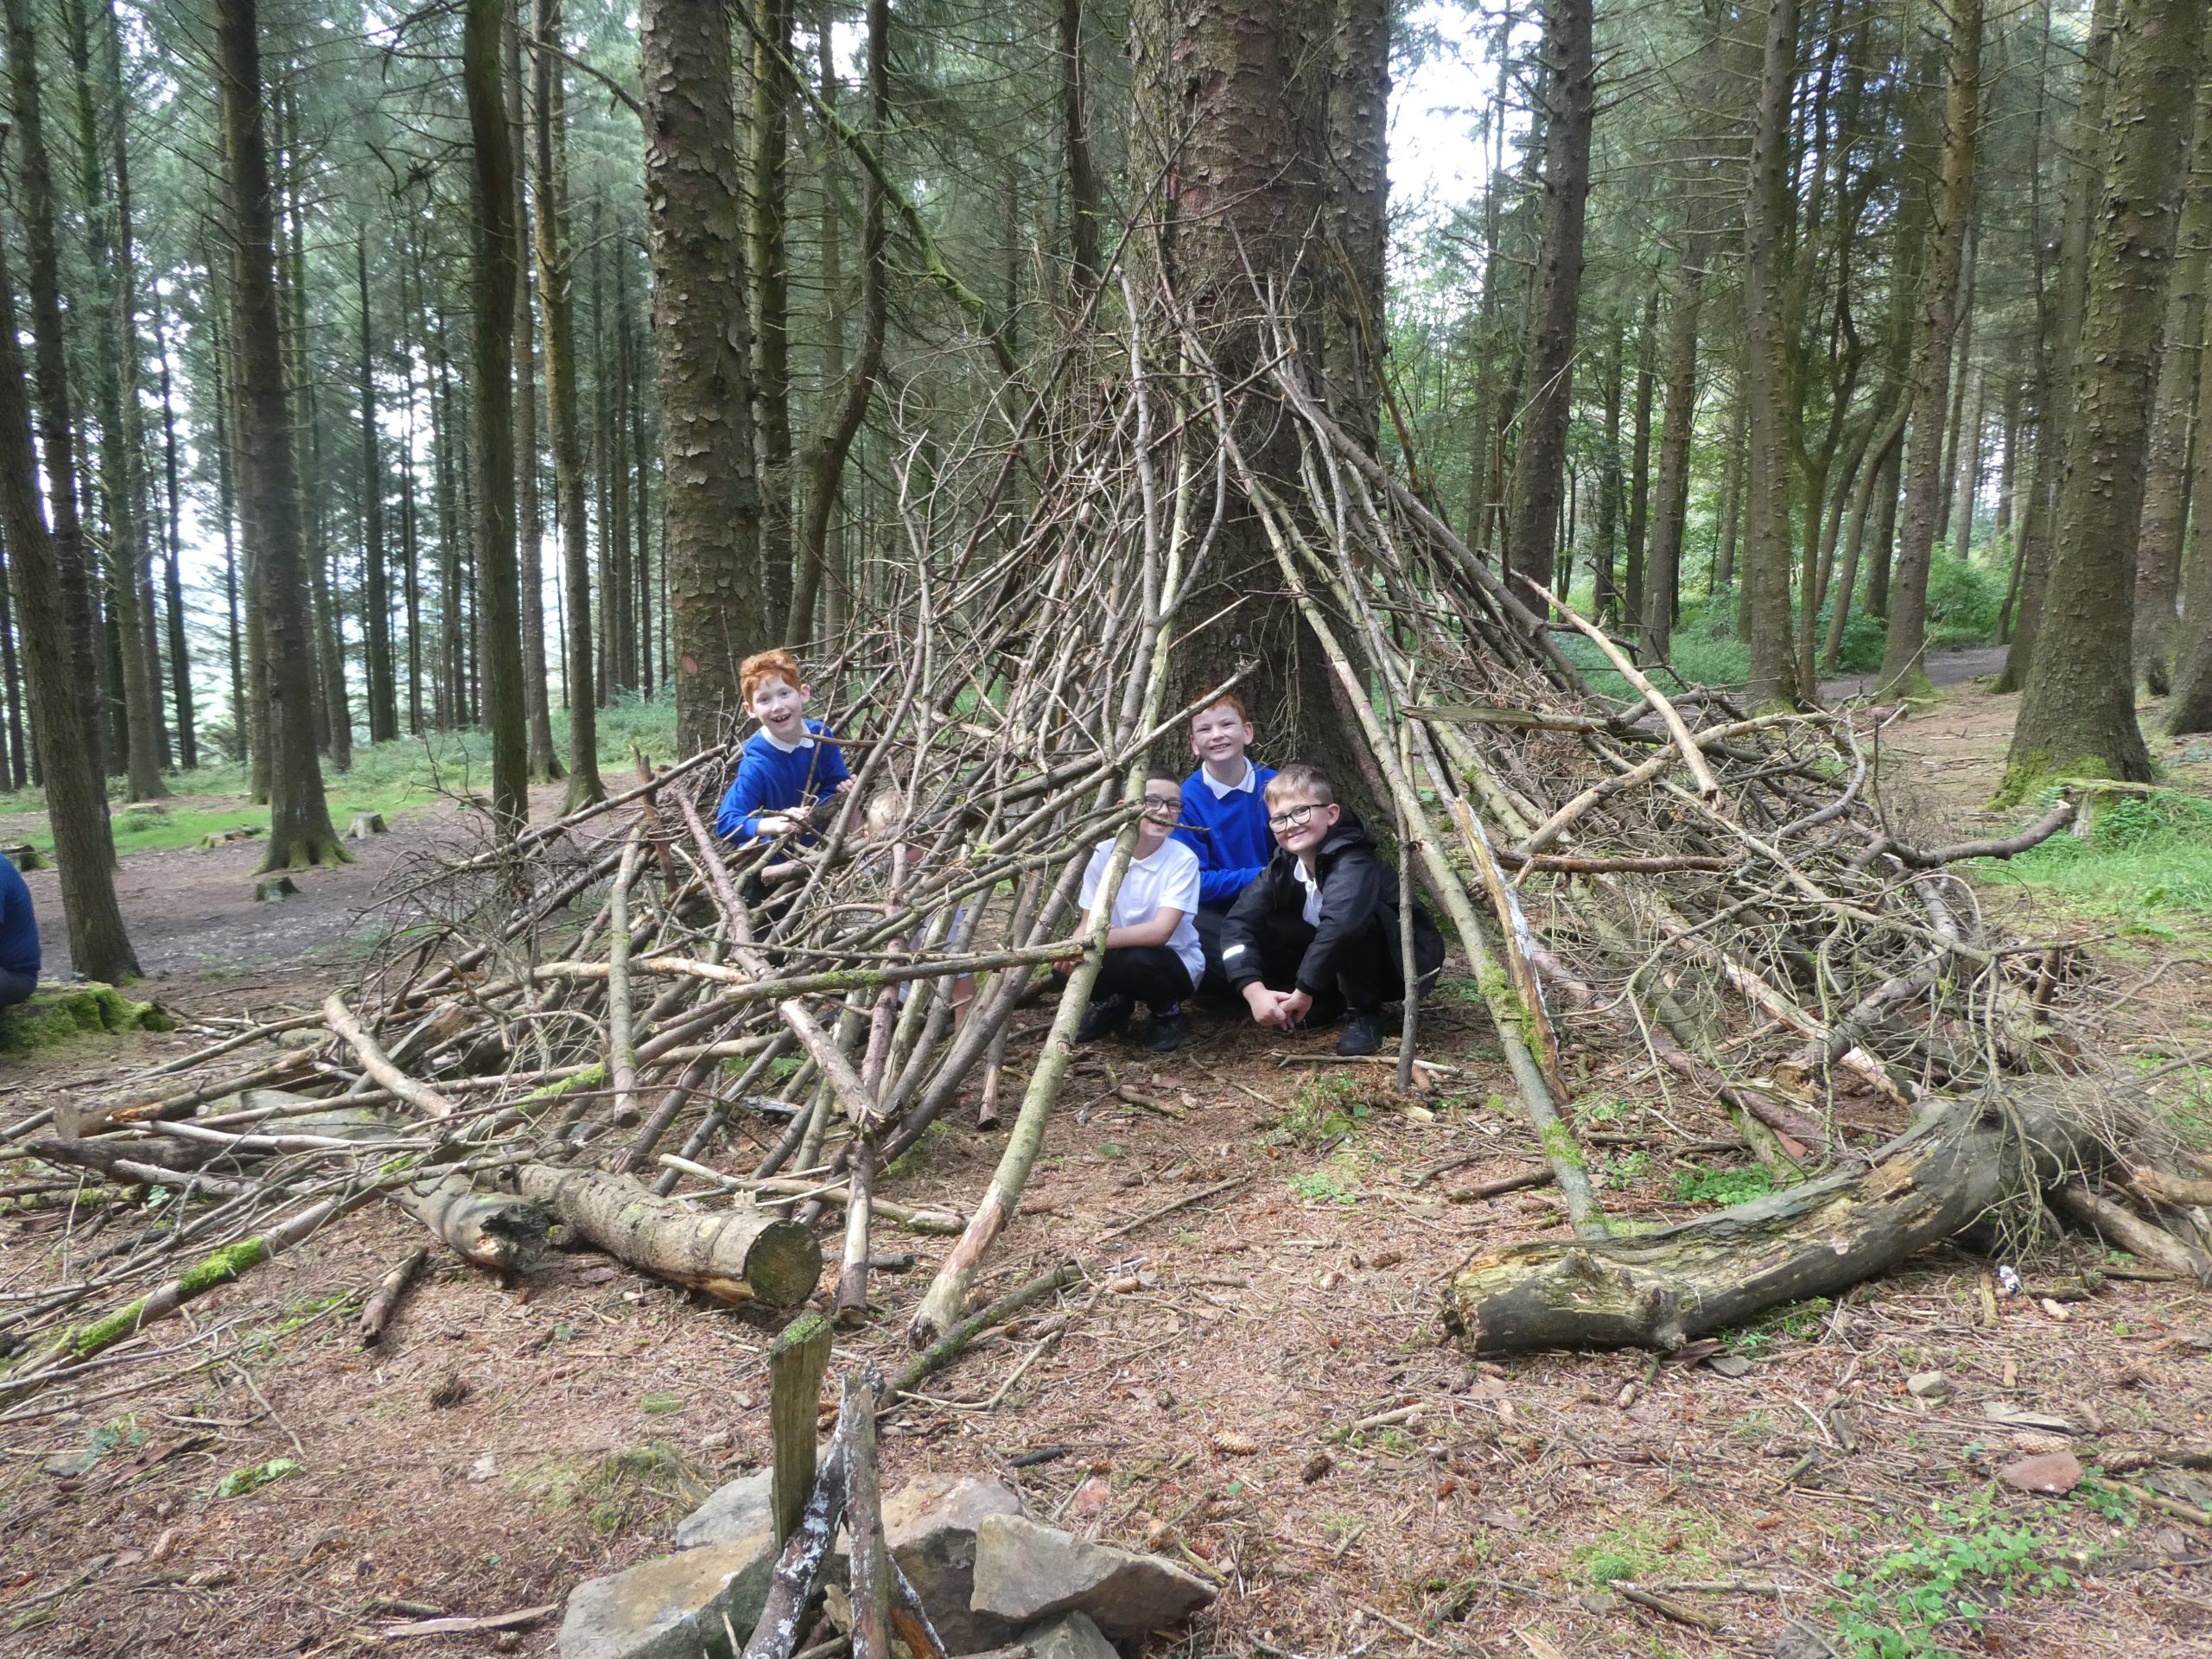 Getting close to nature with Oakenclough class.